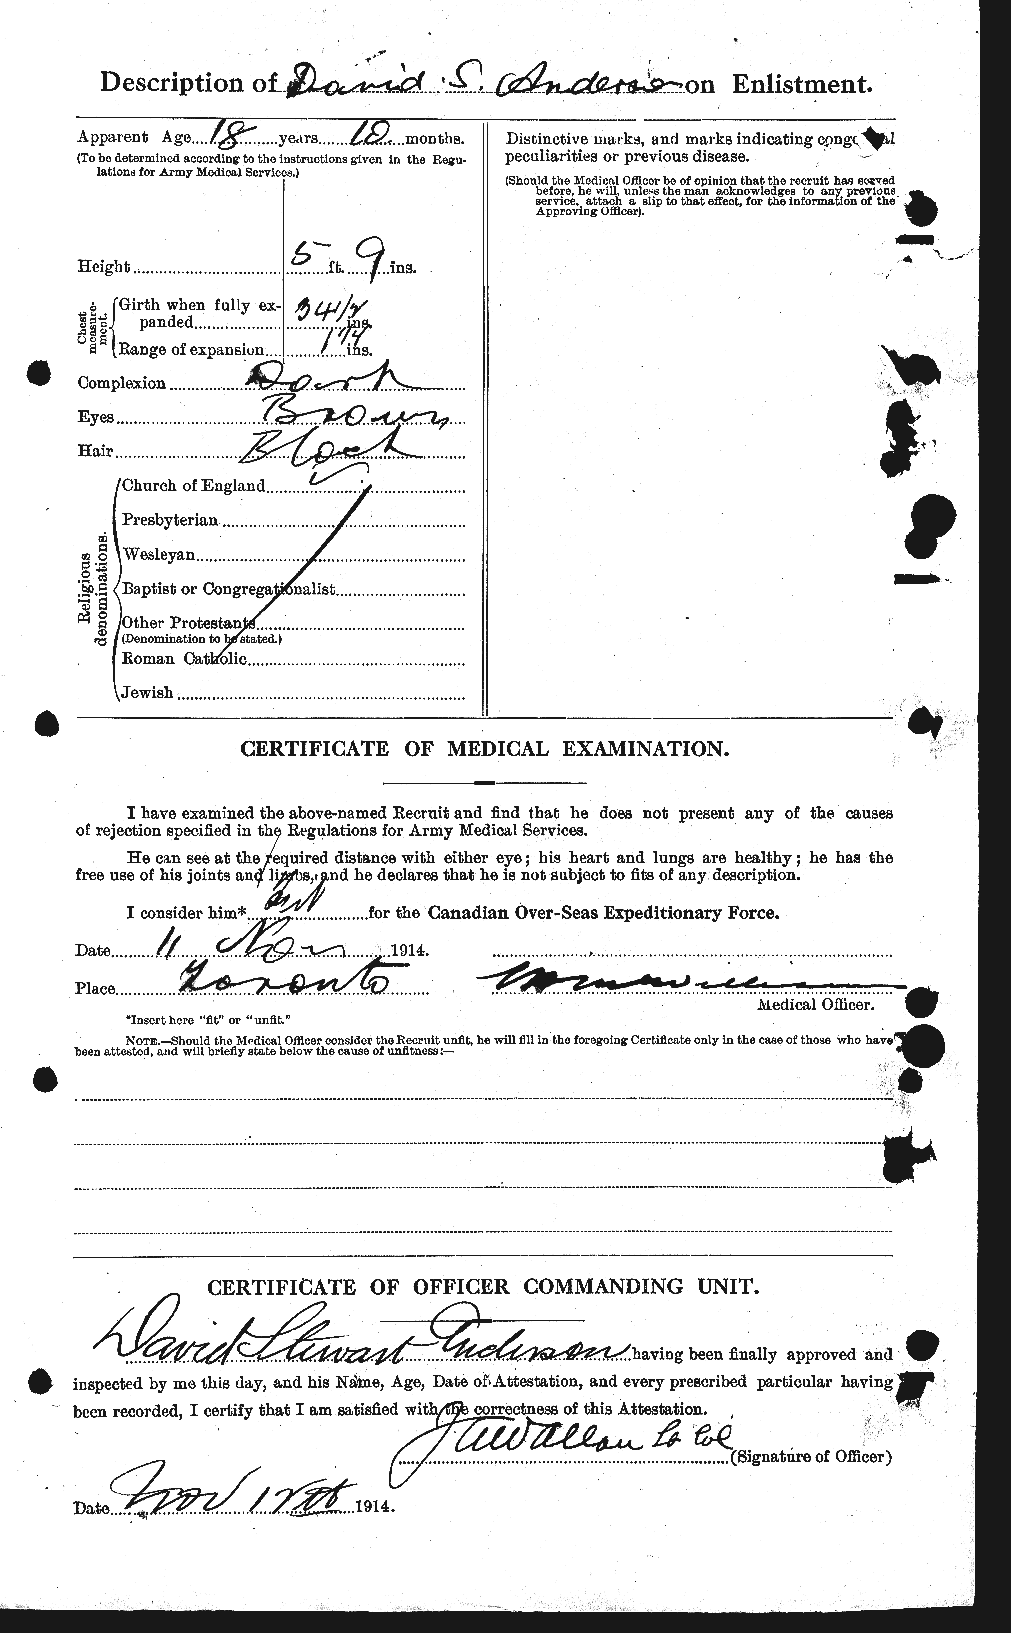 Personnel Records of the First World War - CEF 209997b